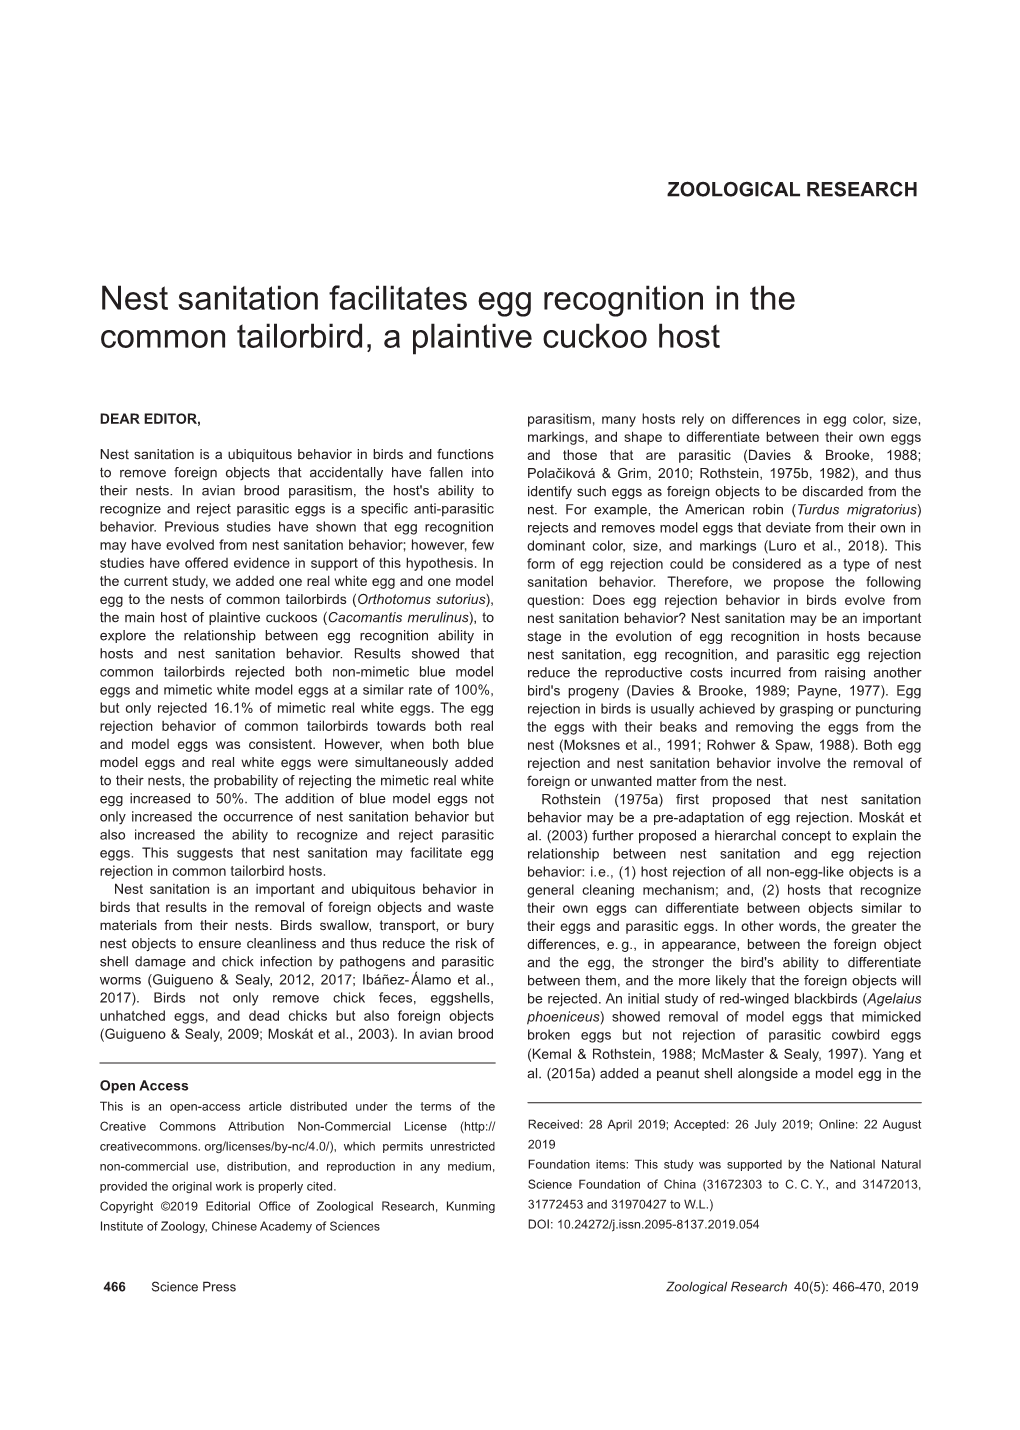 Nest Sanitation Facilitates Egg Recognition in the Common Tailorbird, a Plaintive Cuckoo Host